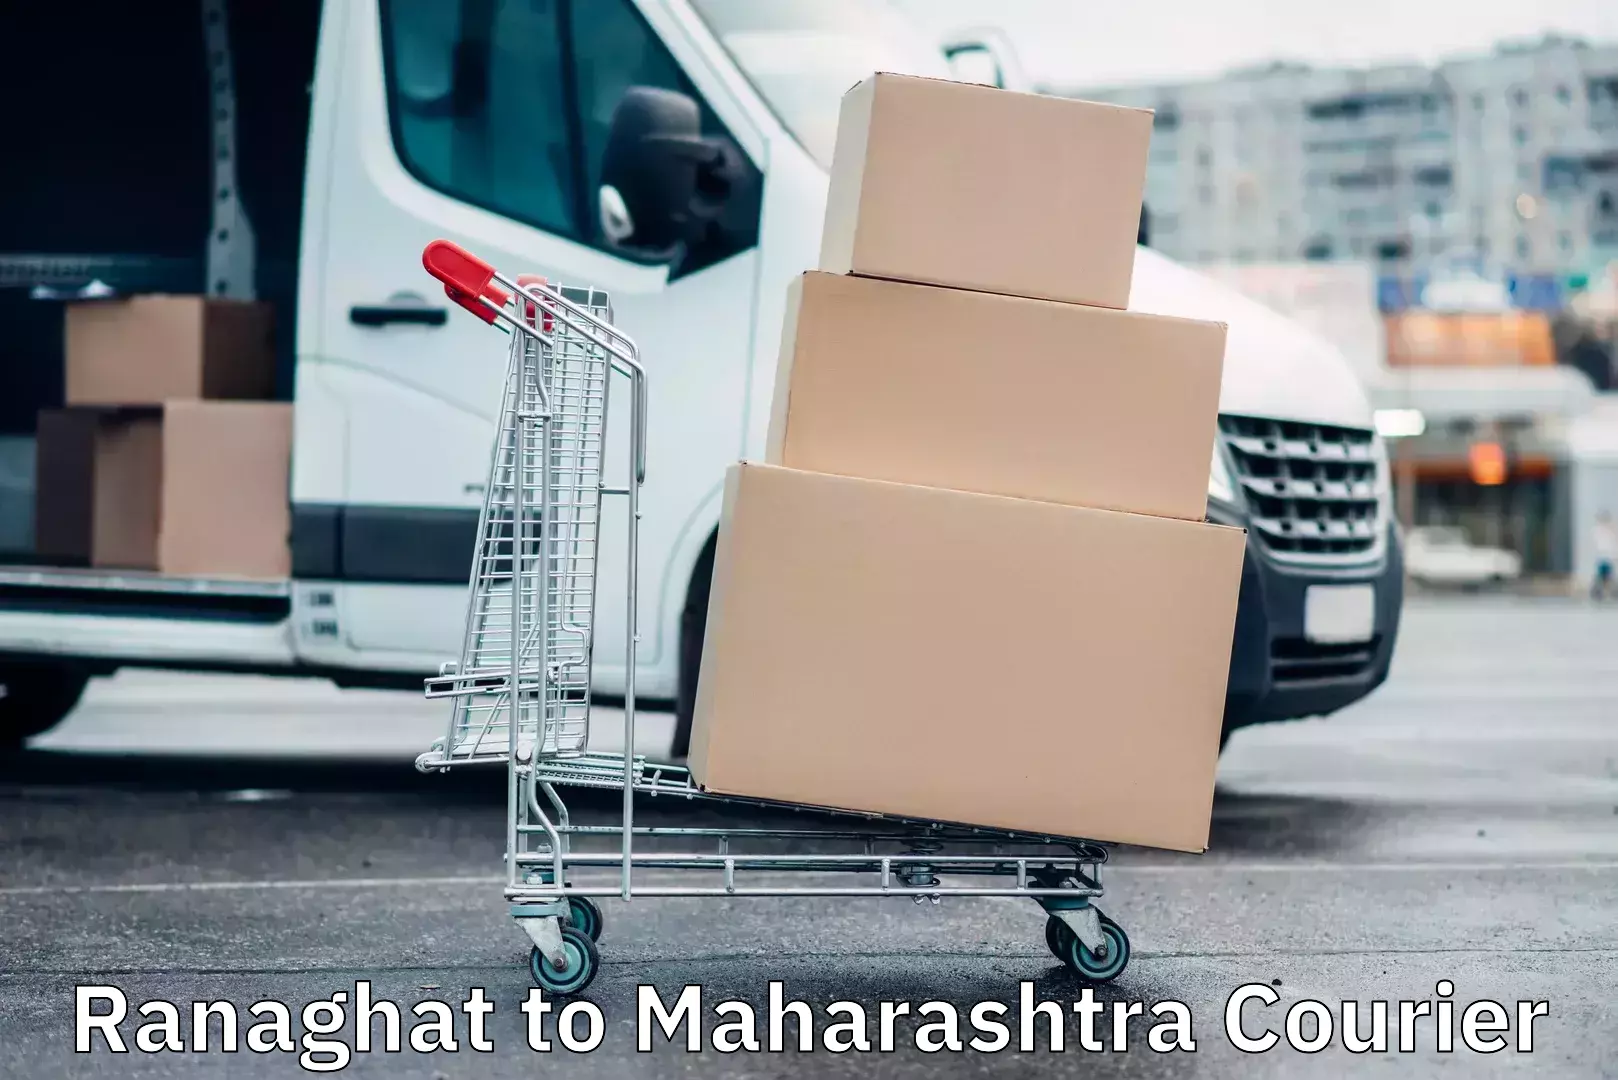 Same-day delivery solutions Ranaghat to Maharashtra